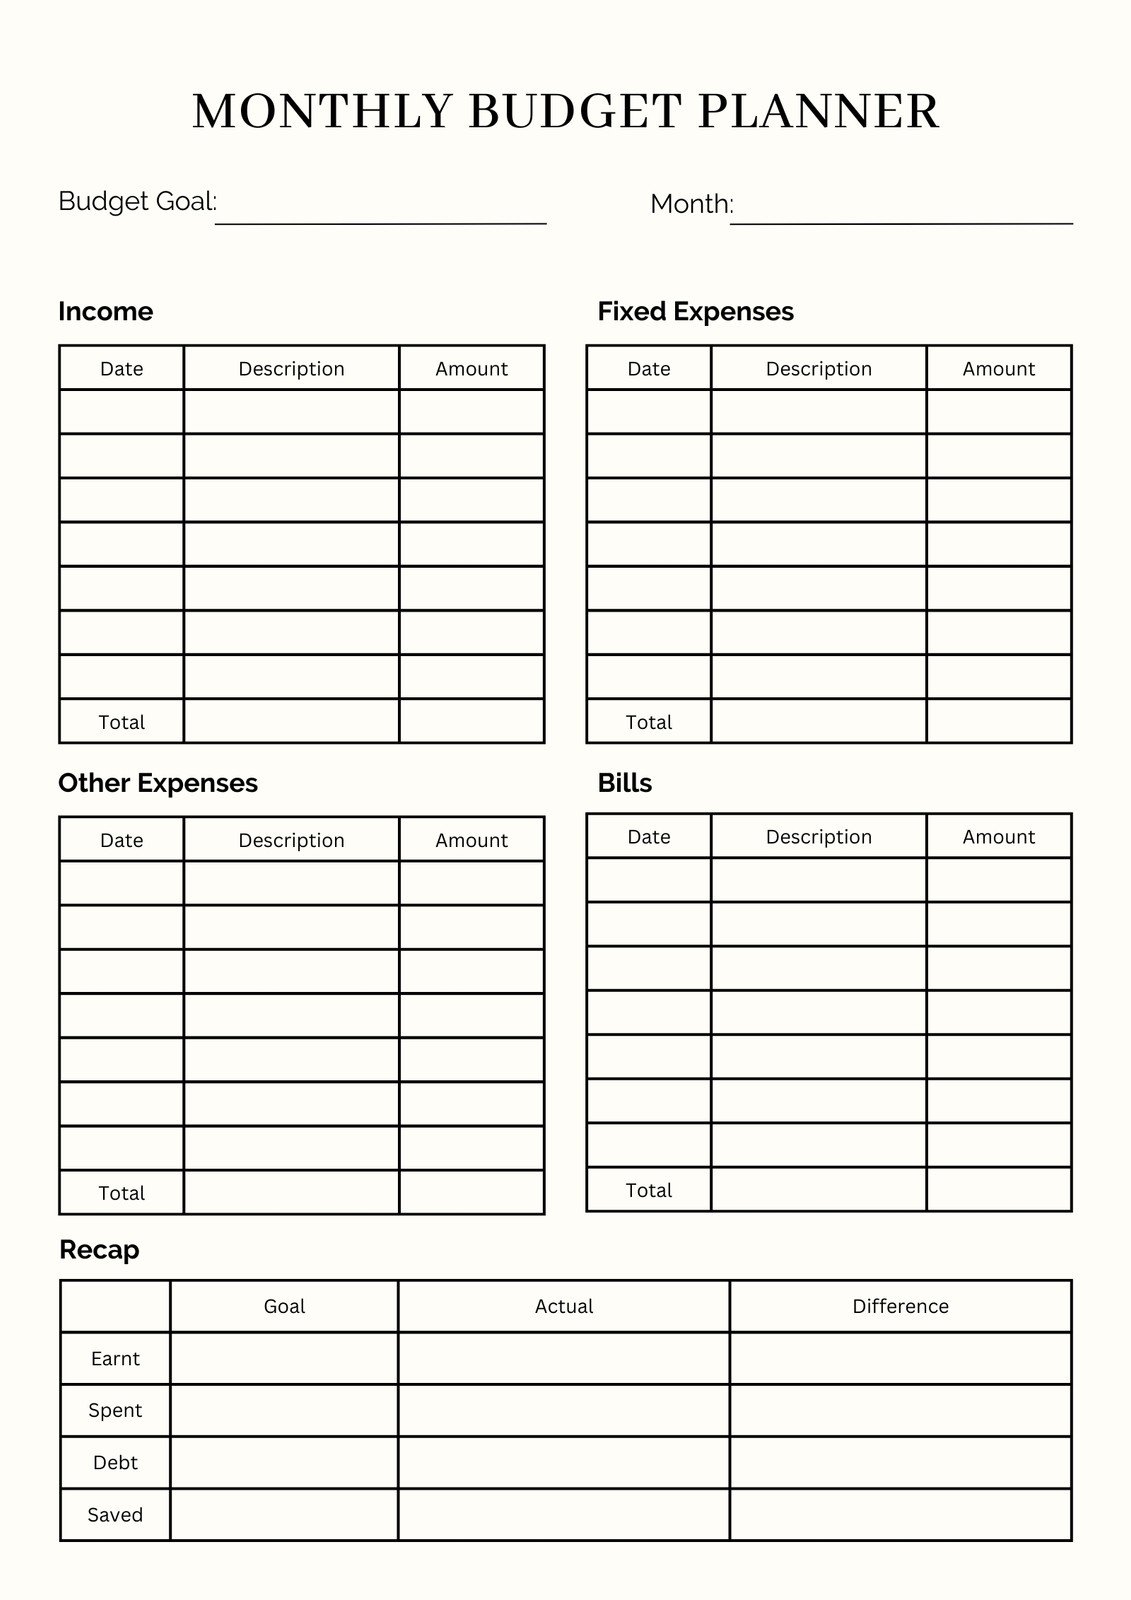 monthly-budget-plan-free-budget-spreadsheet-template-46-off